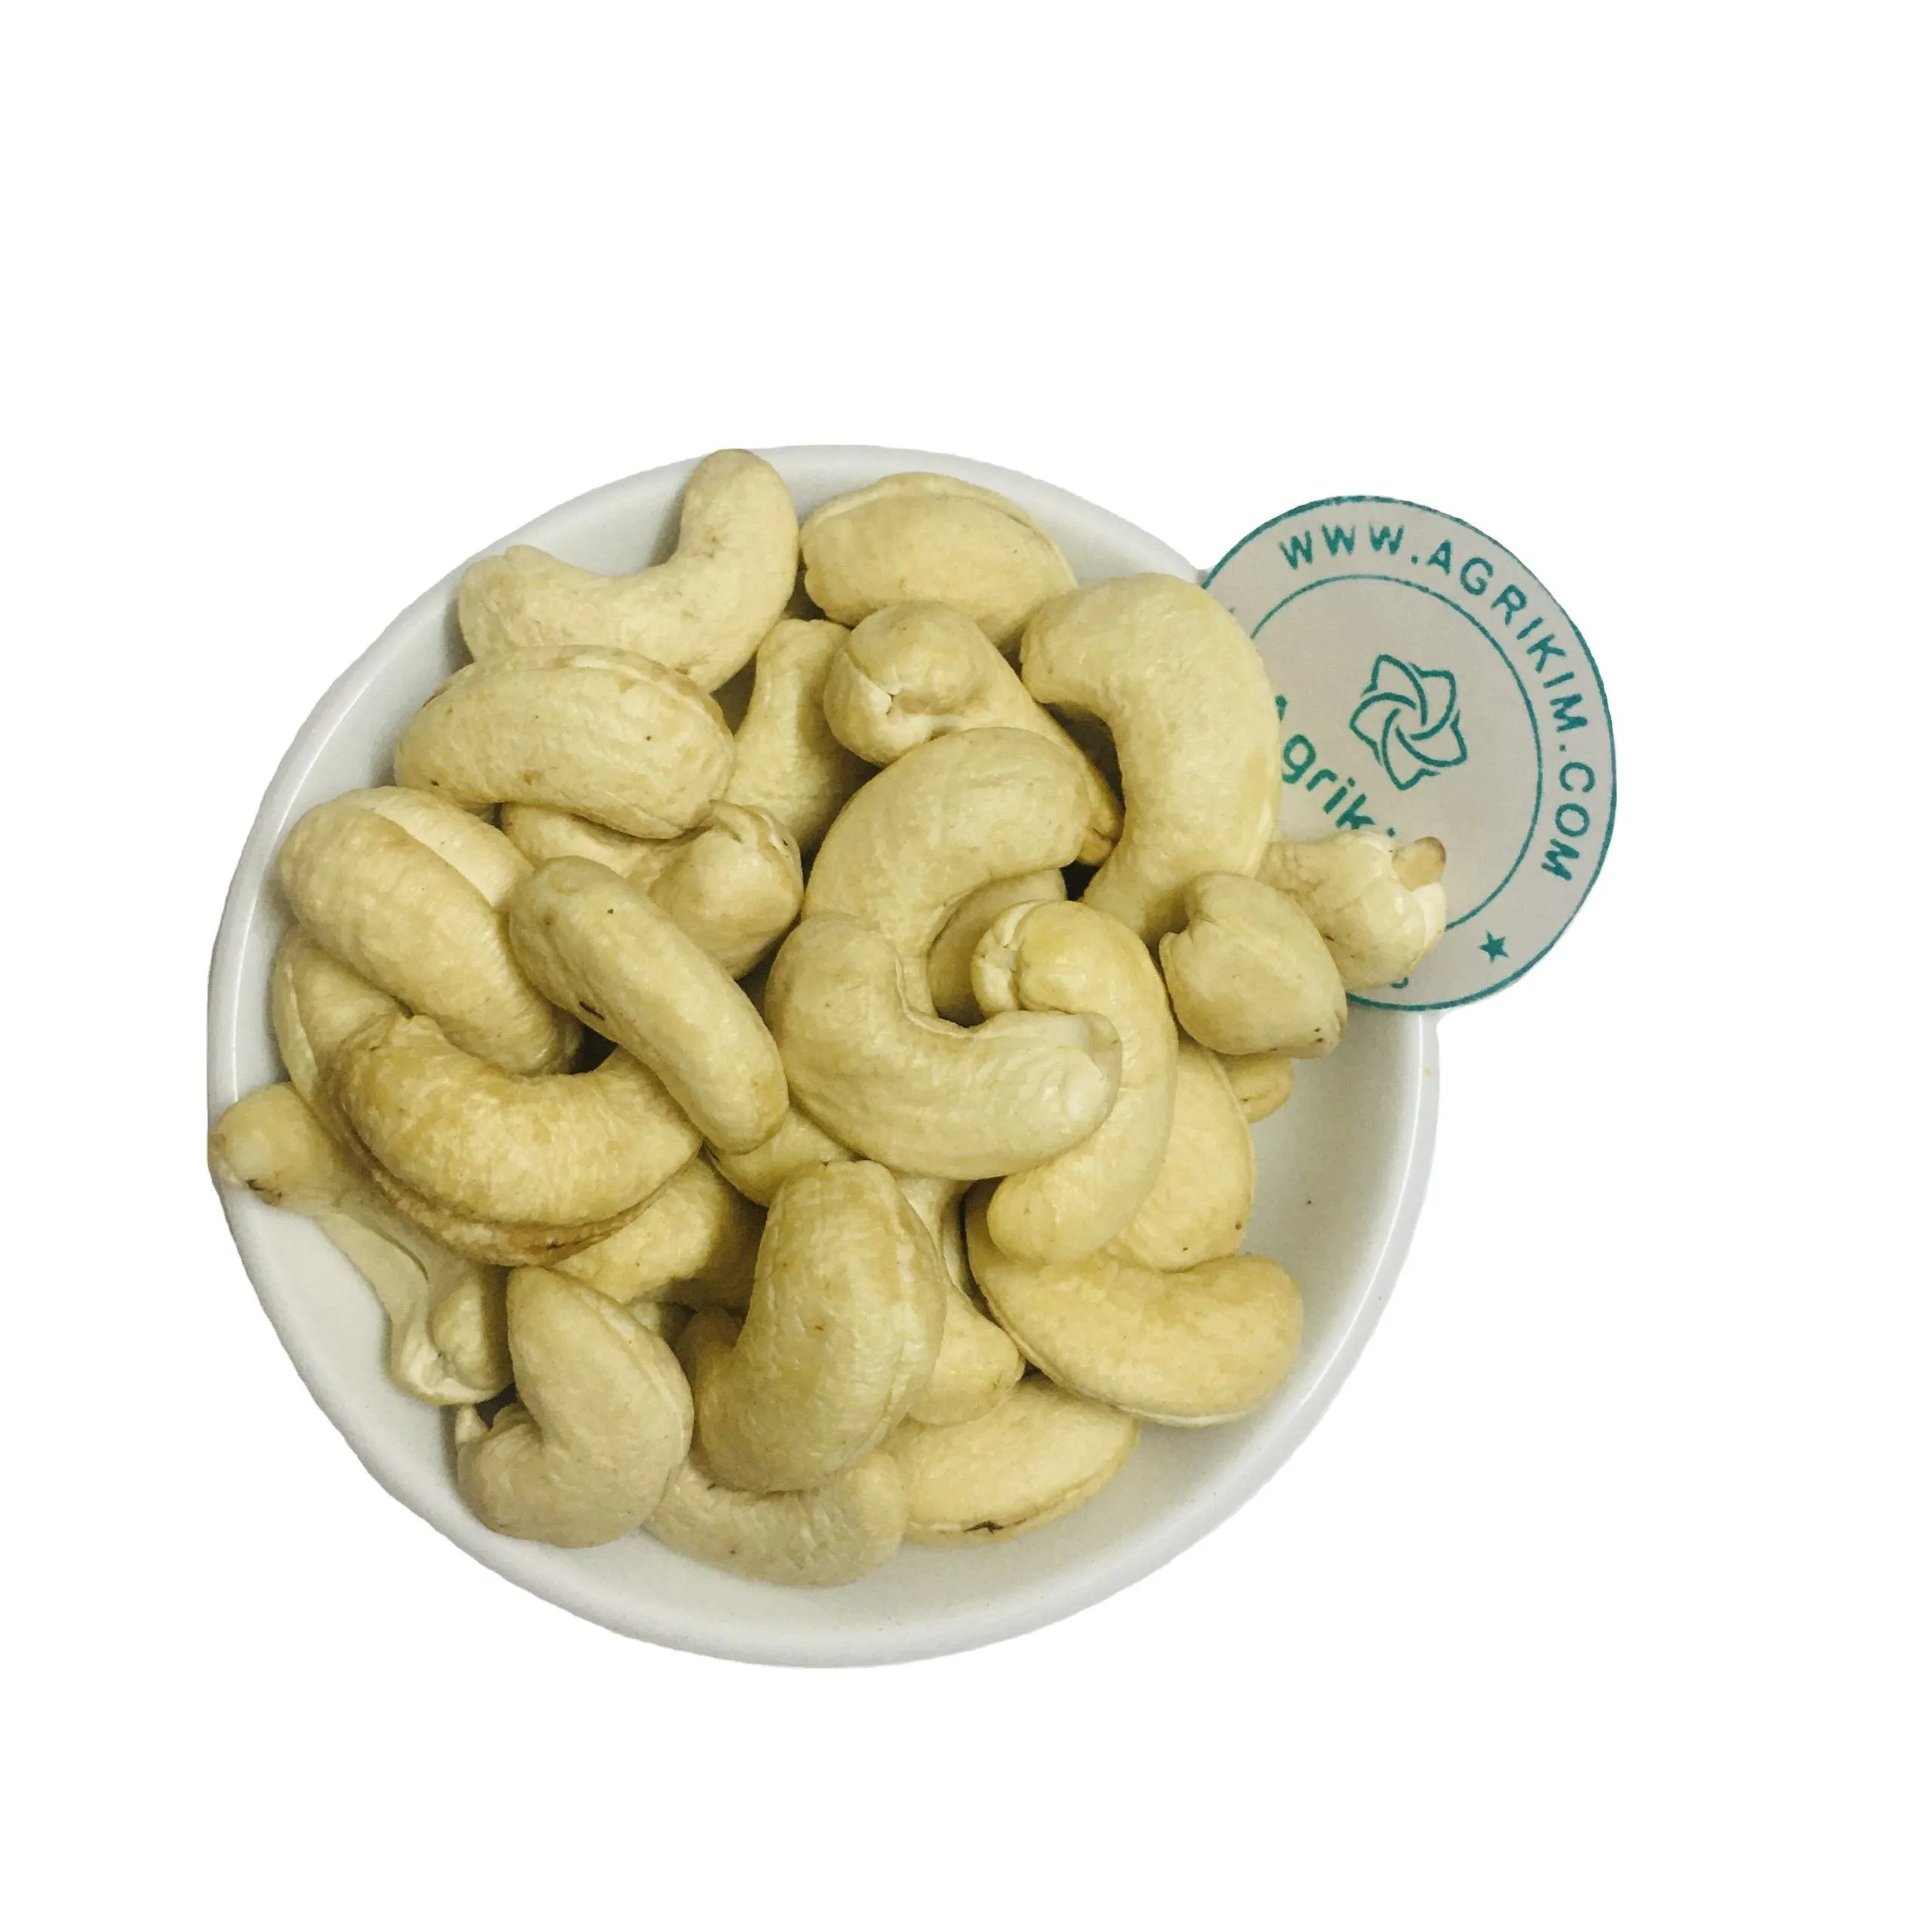 Cashew kernel market purchase price + quality test